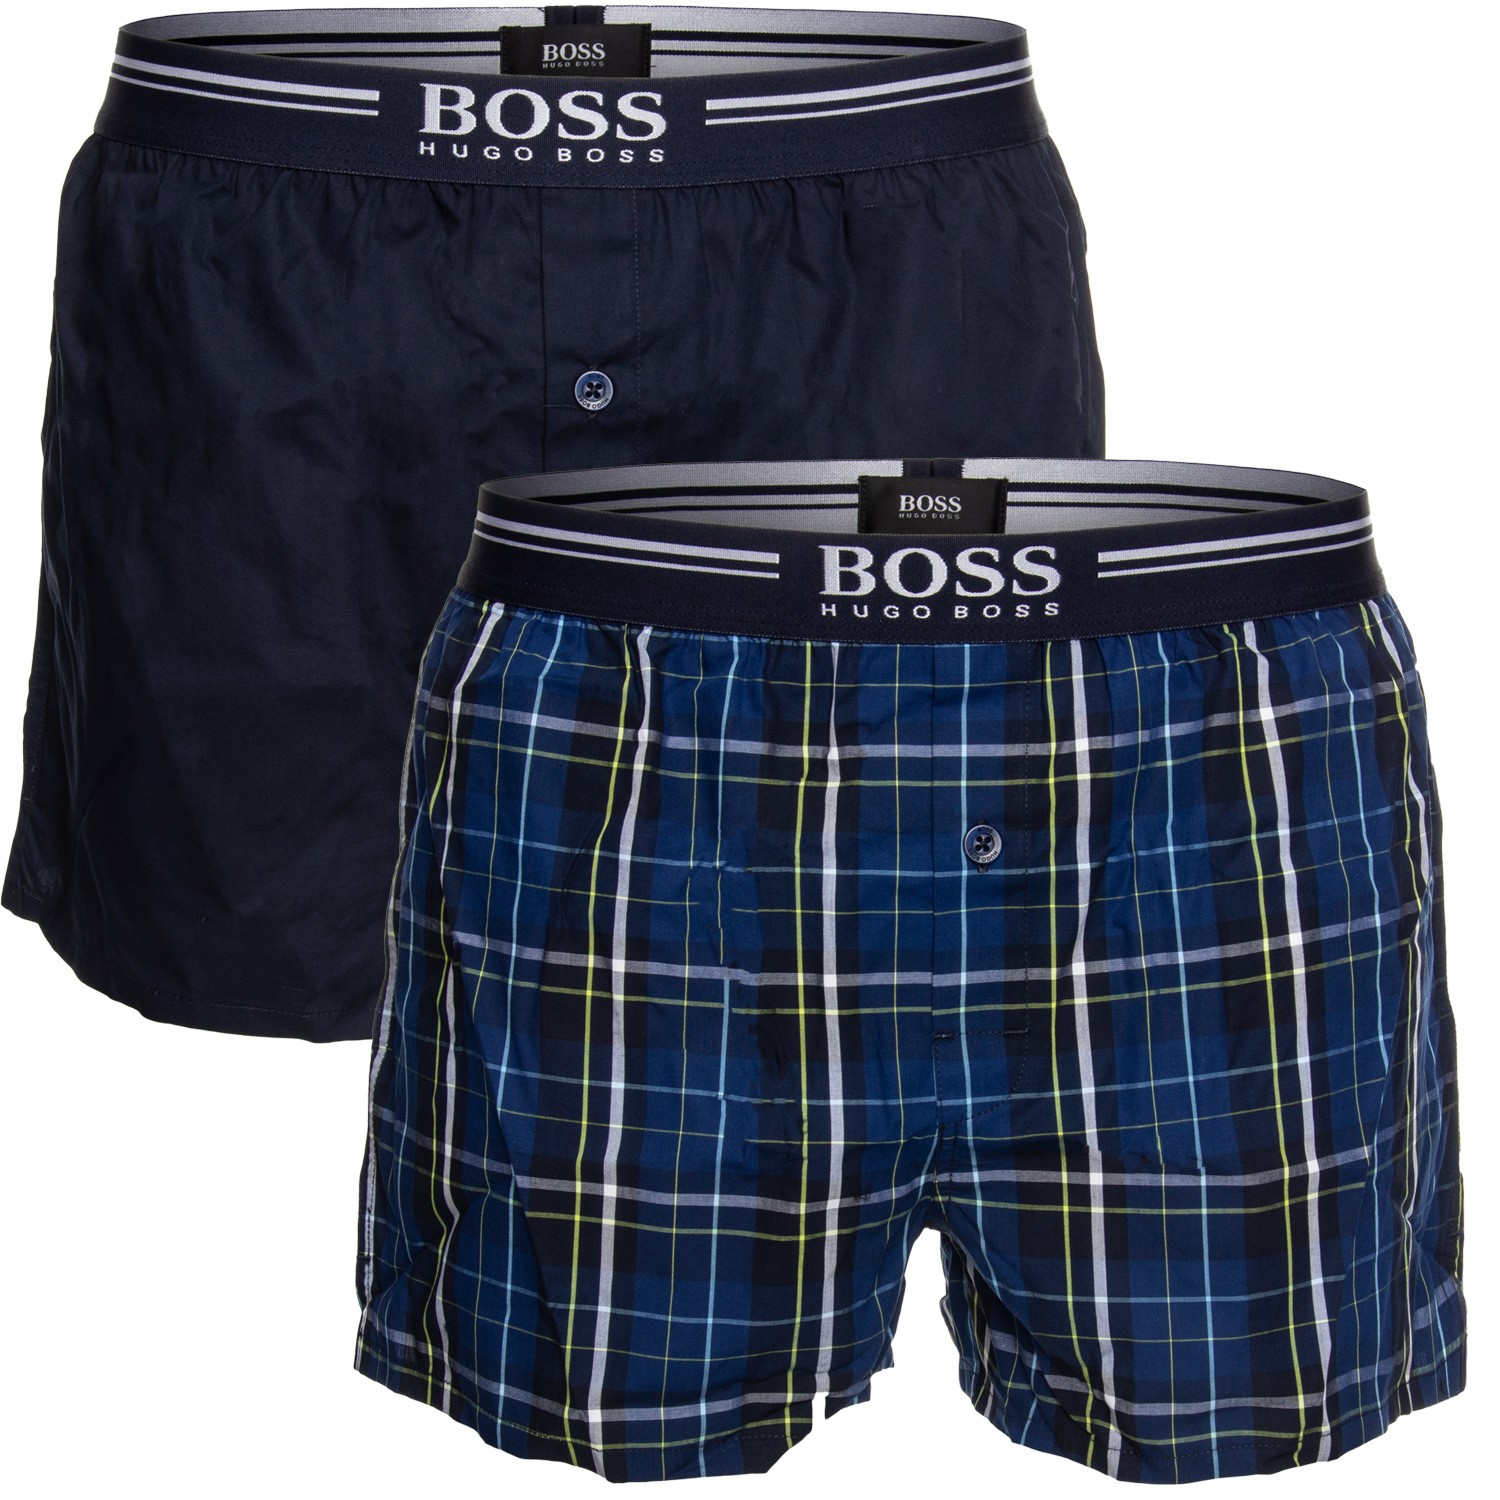 hugo boss button fly boxers